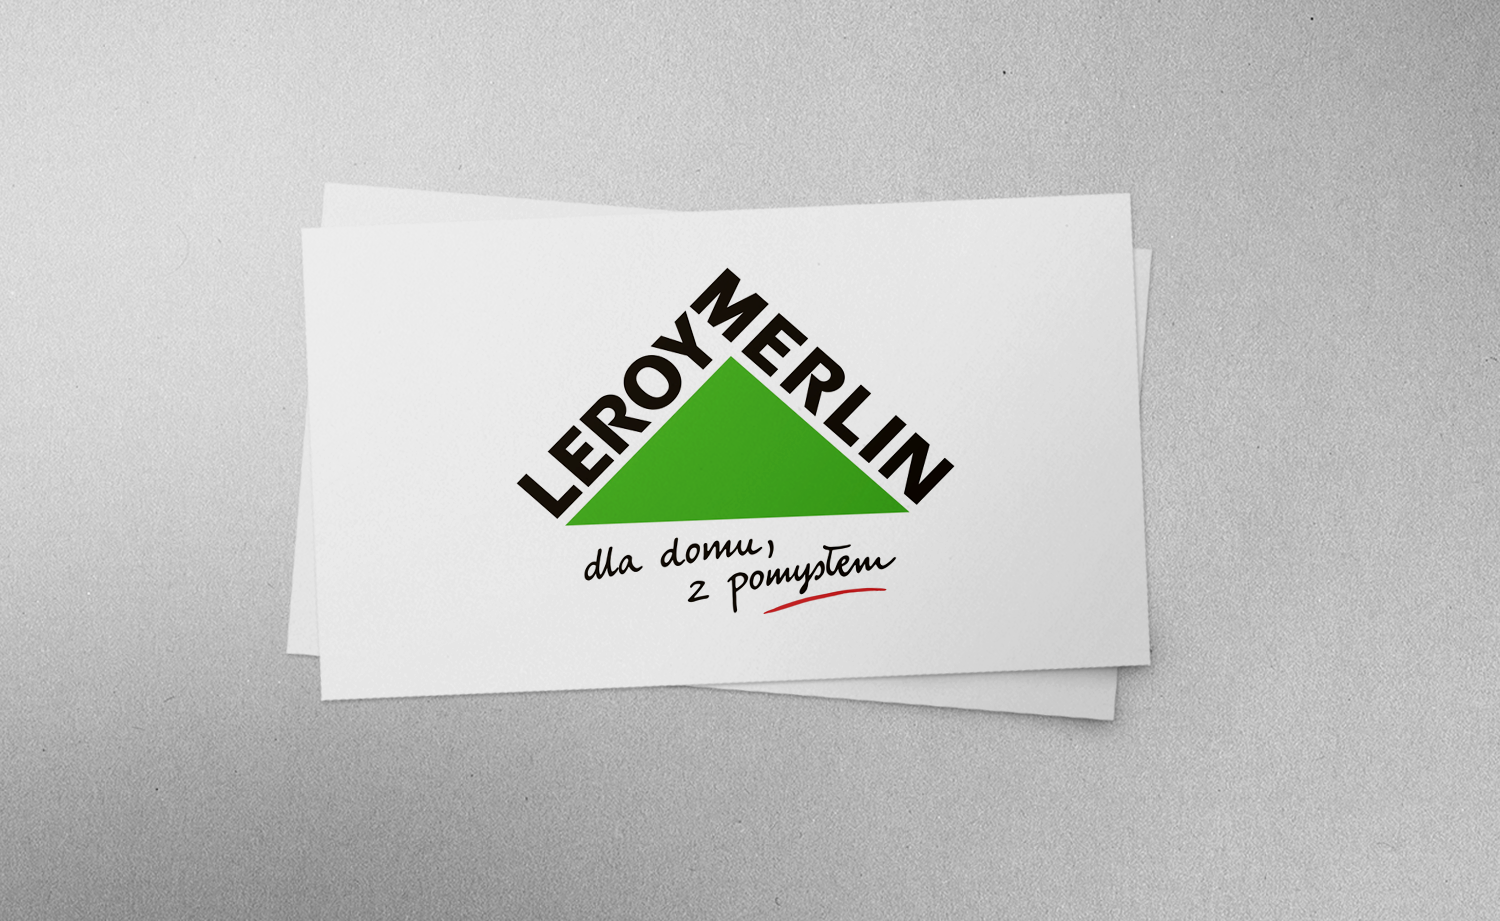 Cooperation with Leroy Merlin